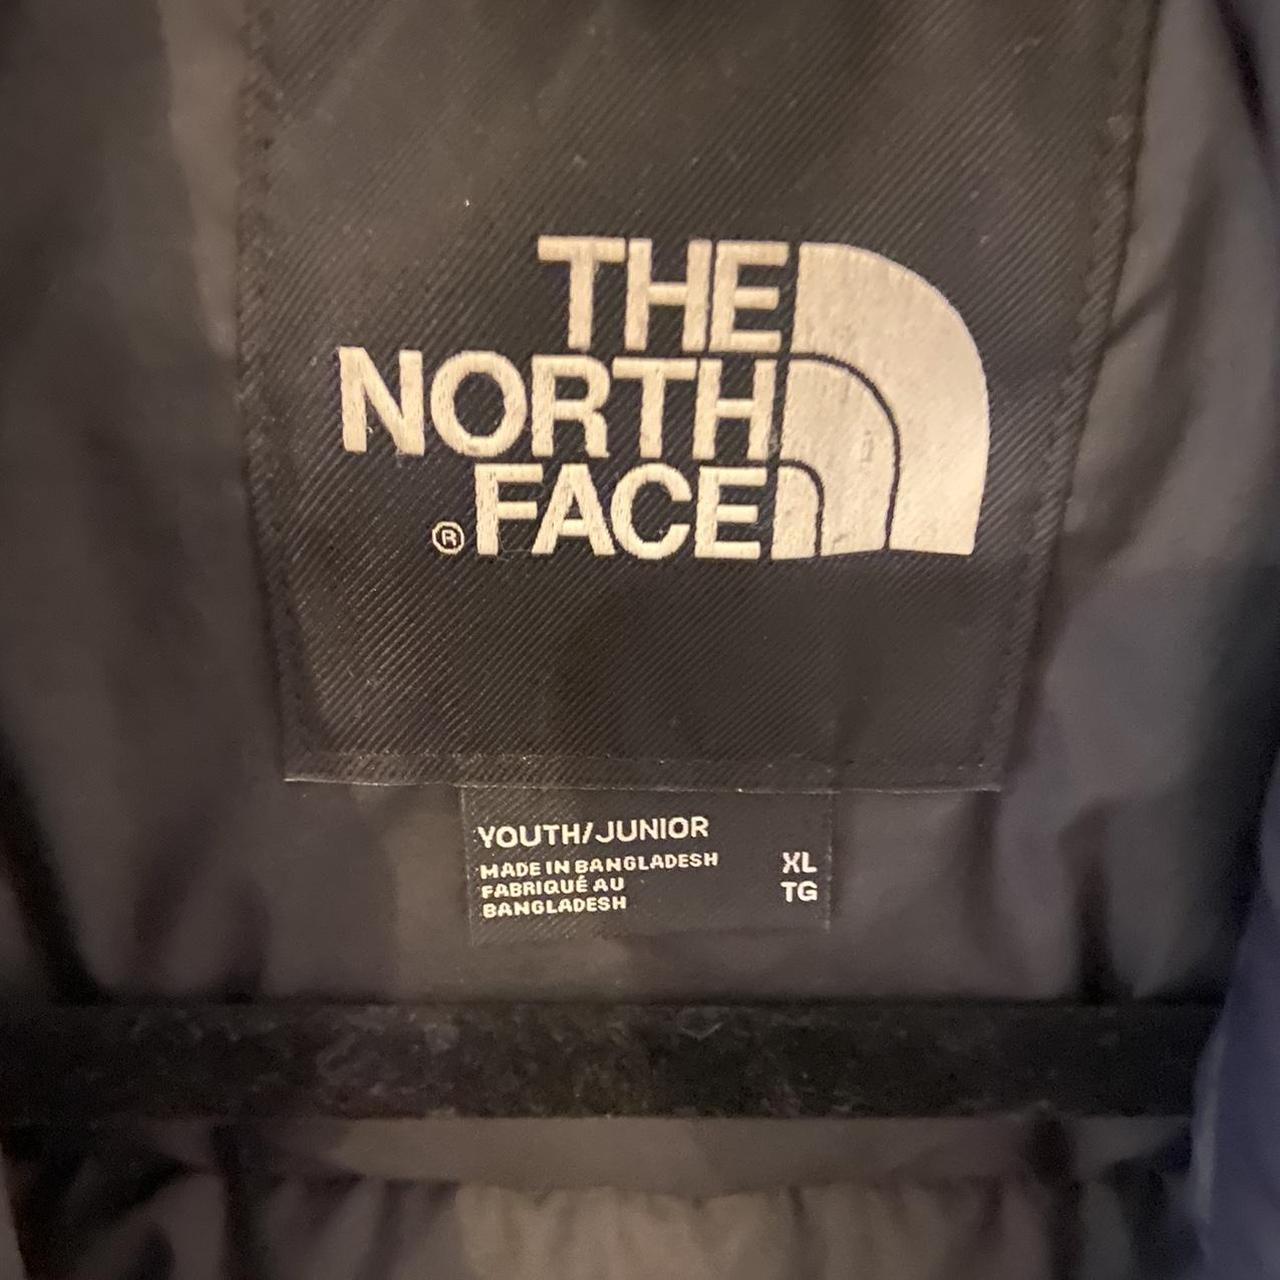 The North Face Women's White and Black Coat | Depop